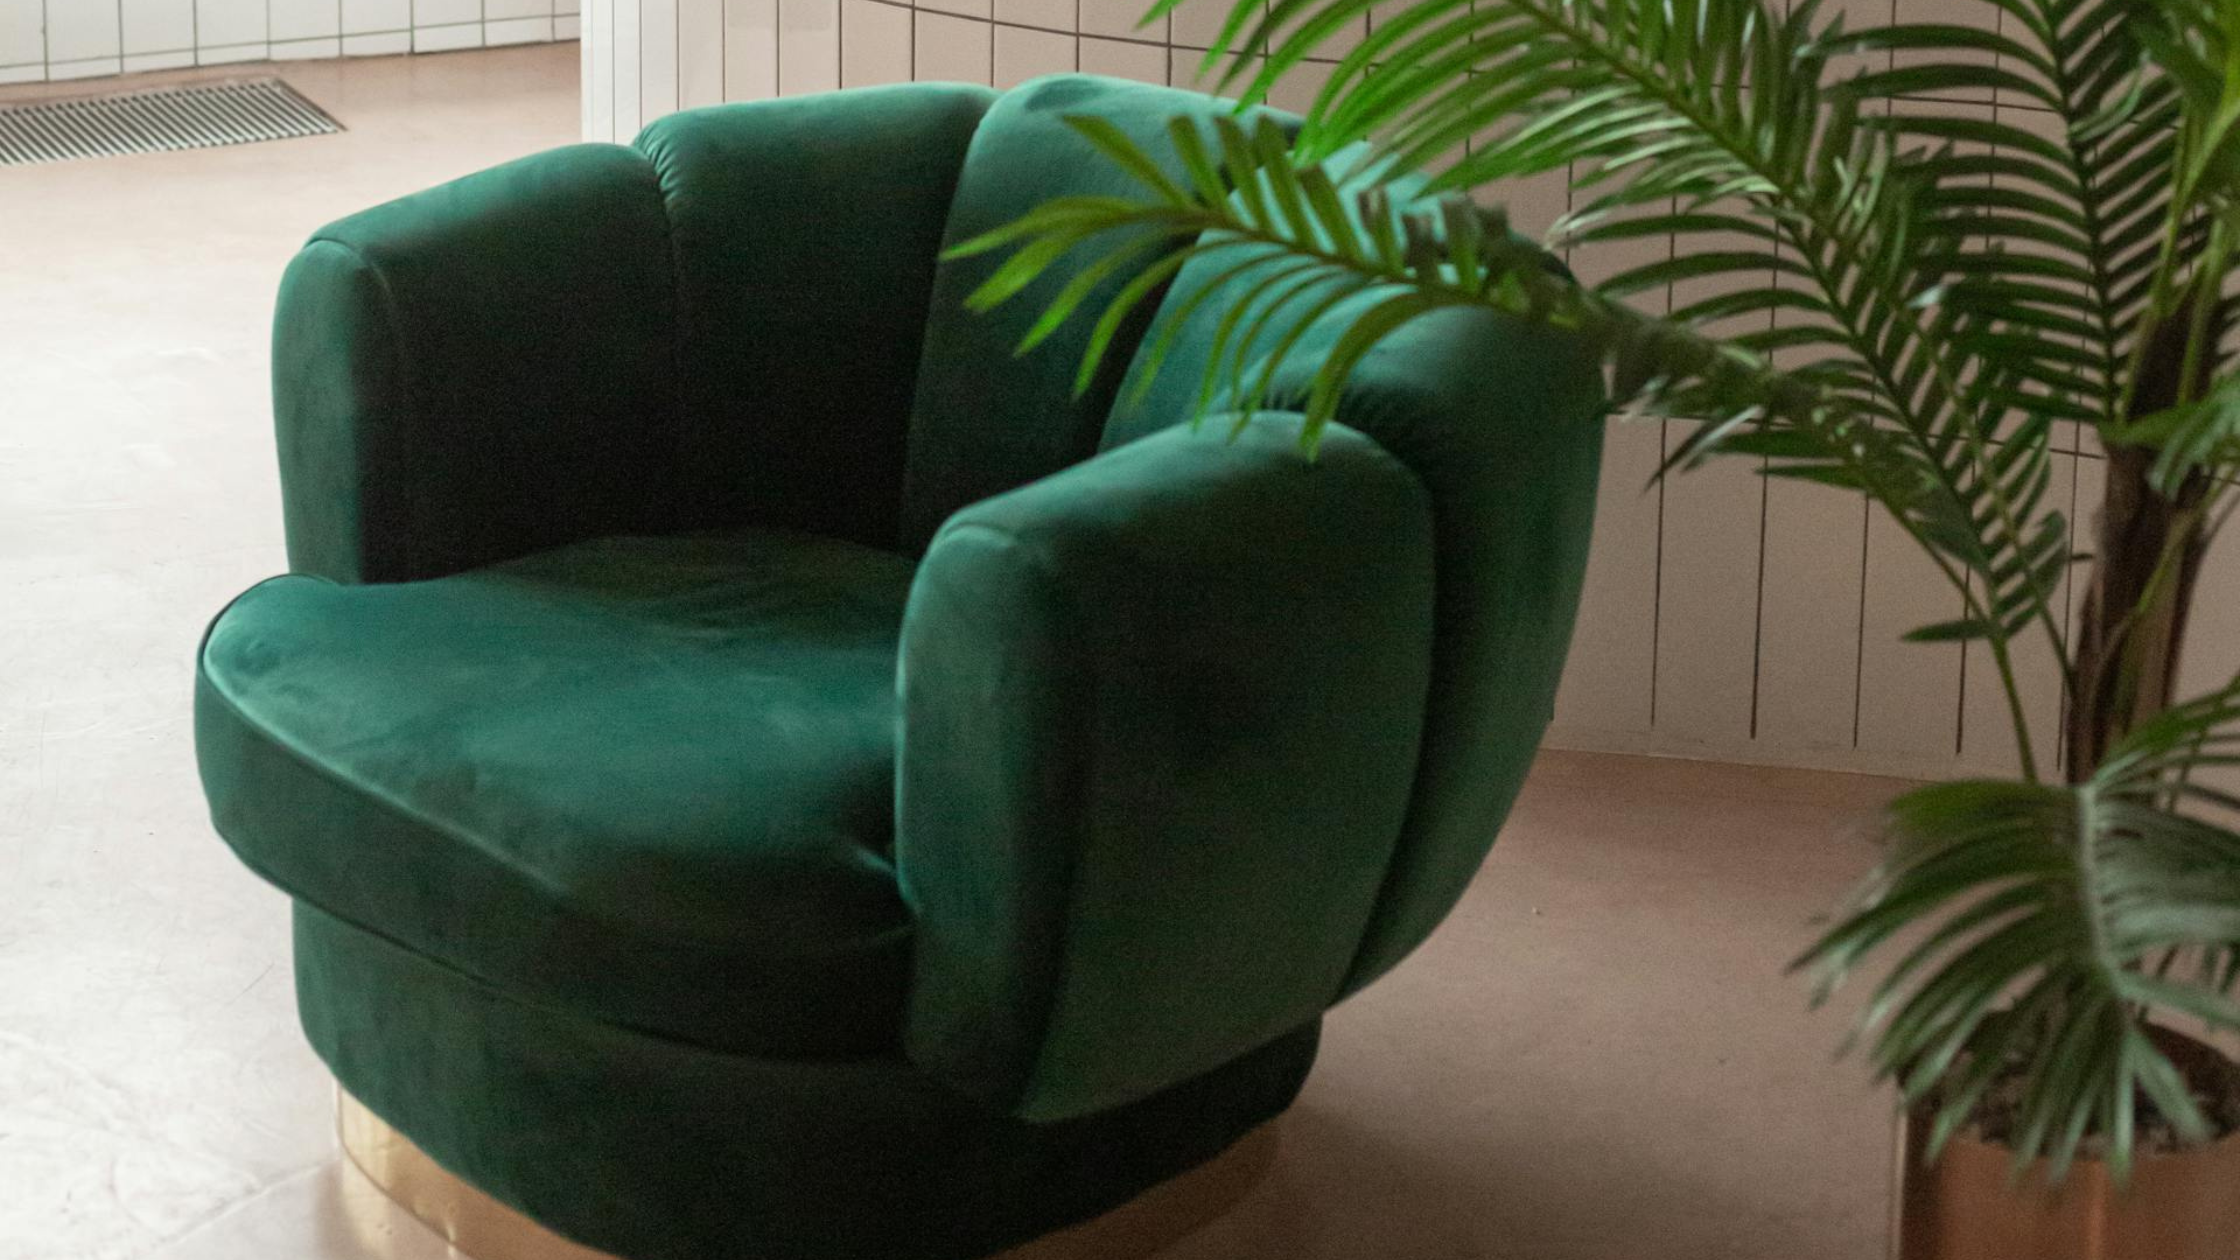 Groene fauteuil.png